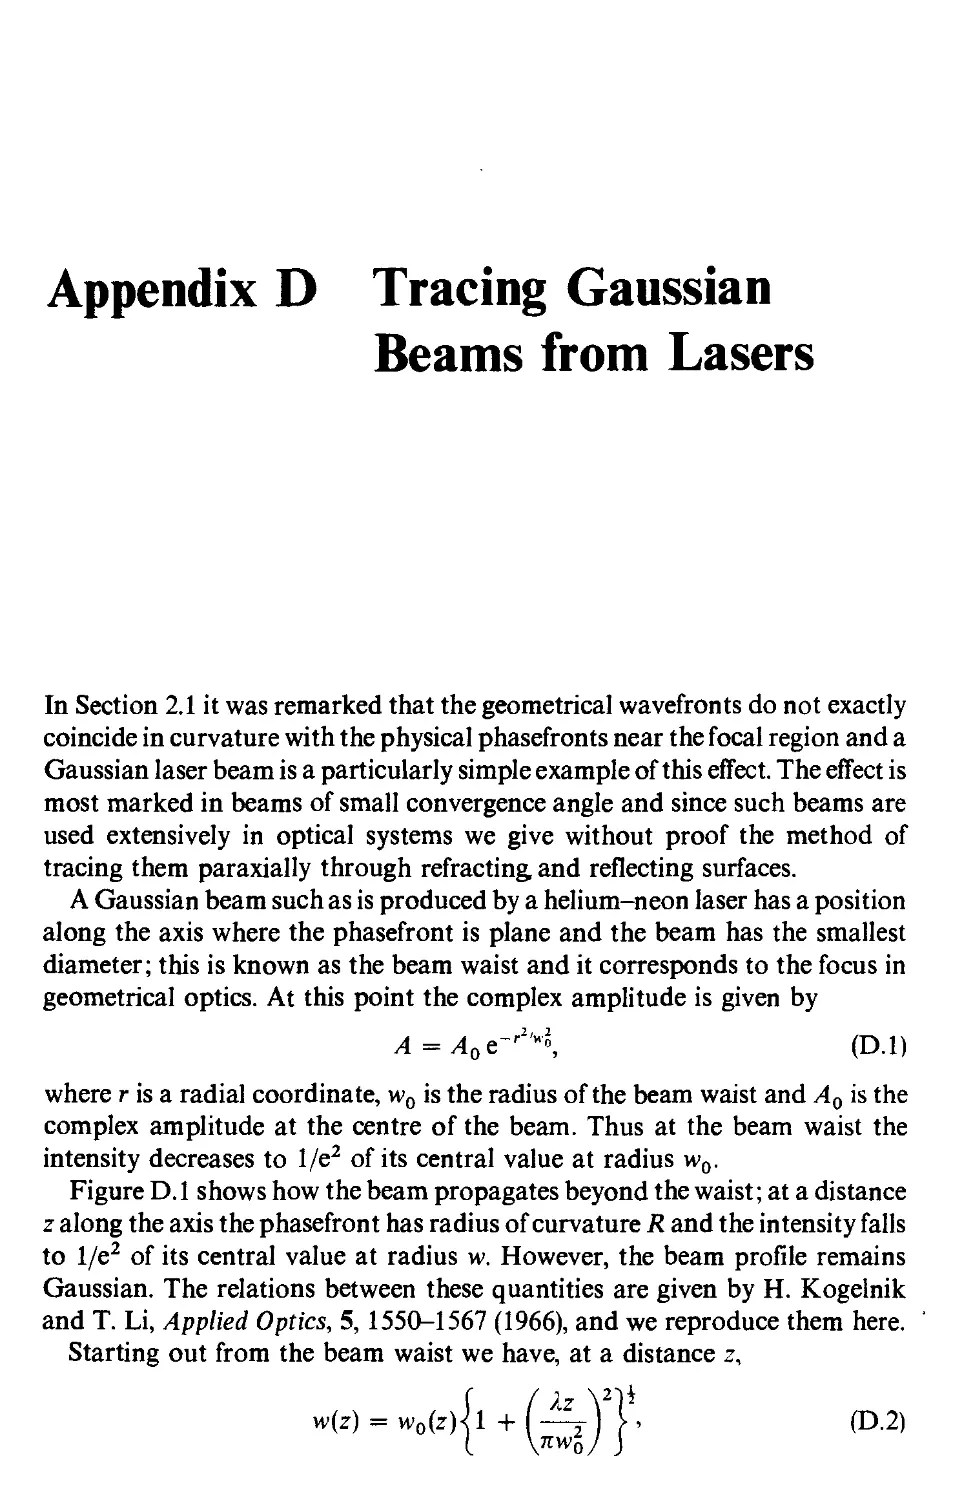 Appendix D. Tracing Gaussian beams from lasers